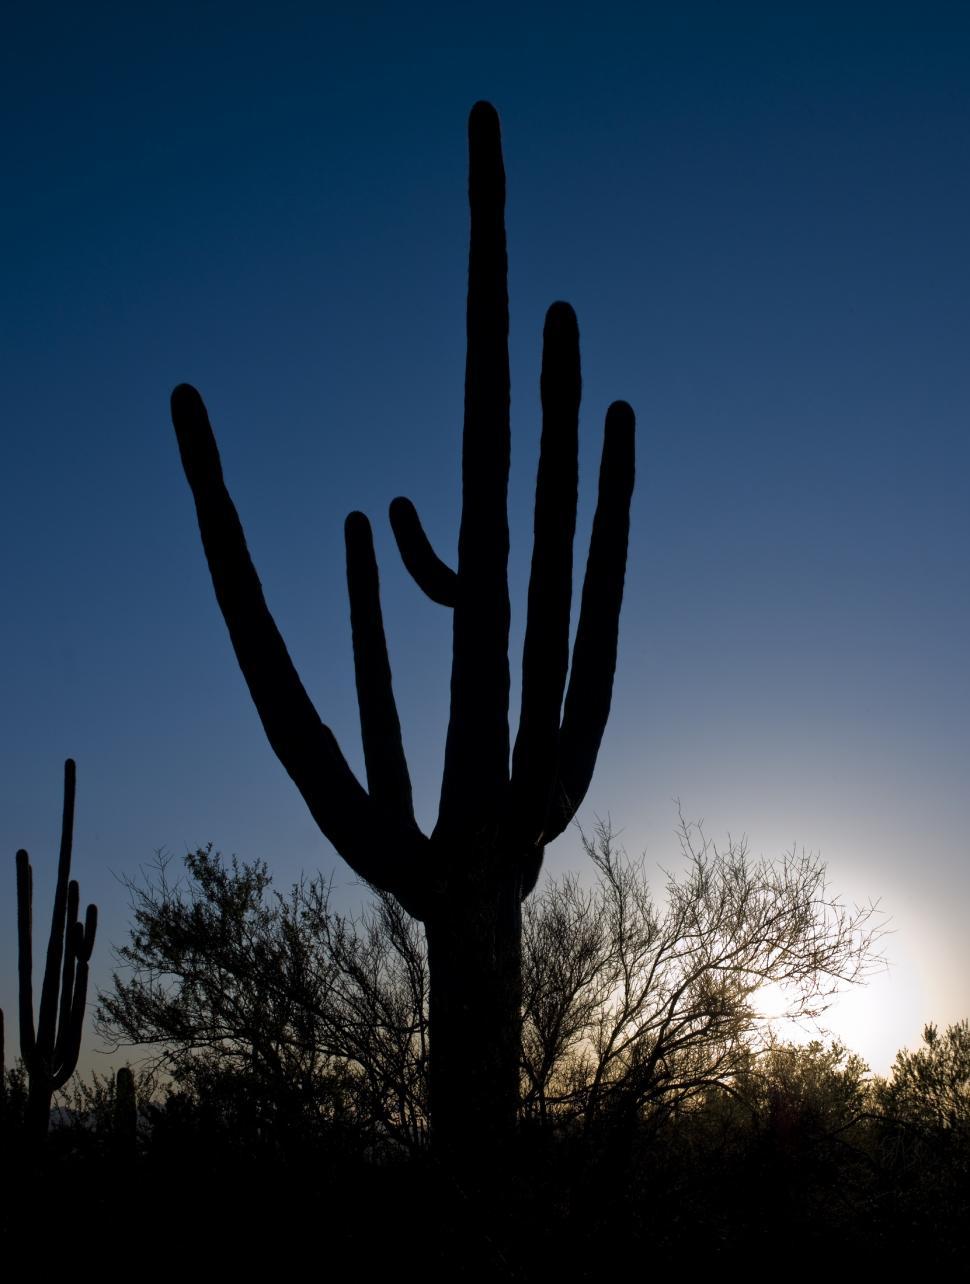 Free Image of Large Cactus Silhouetted Against Blue Sky 